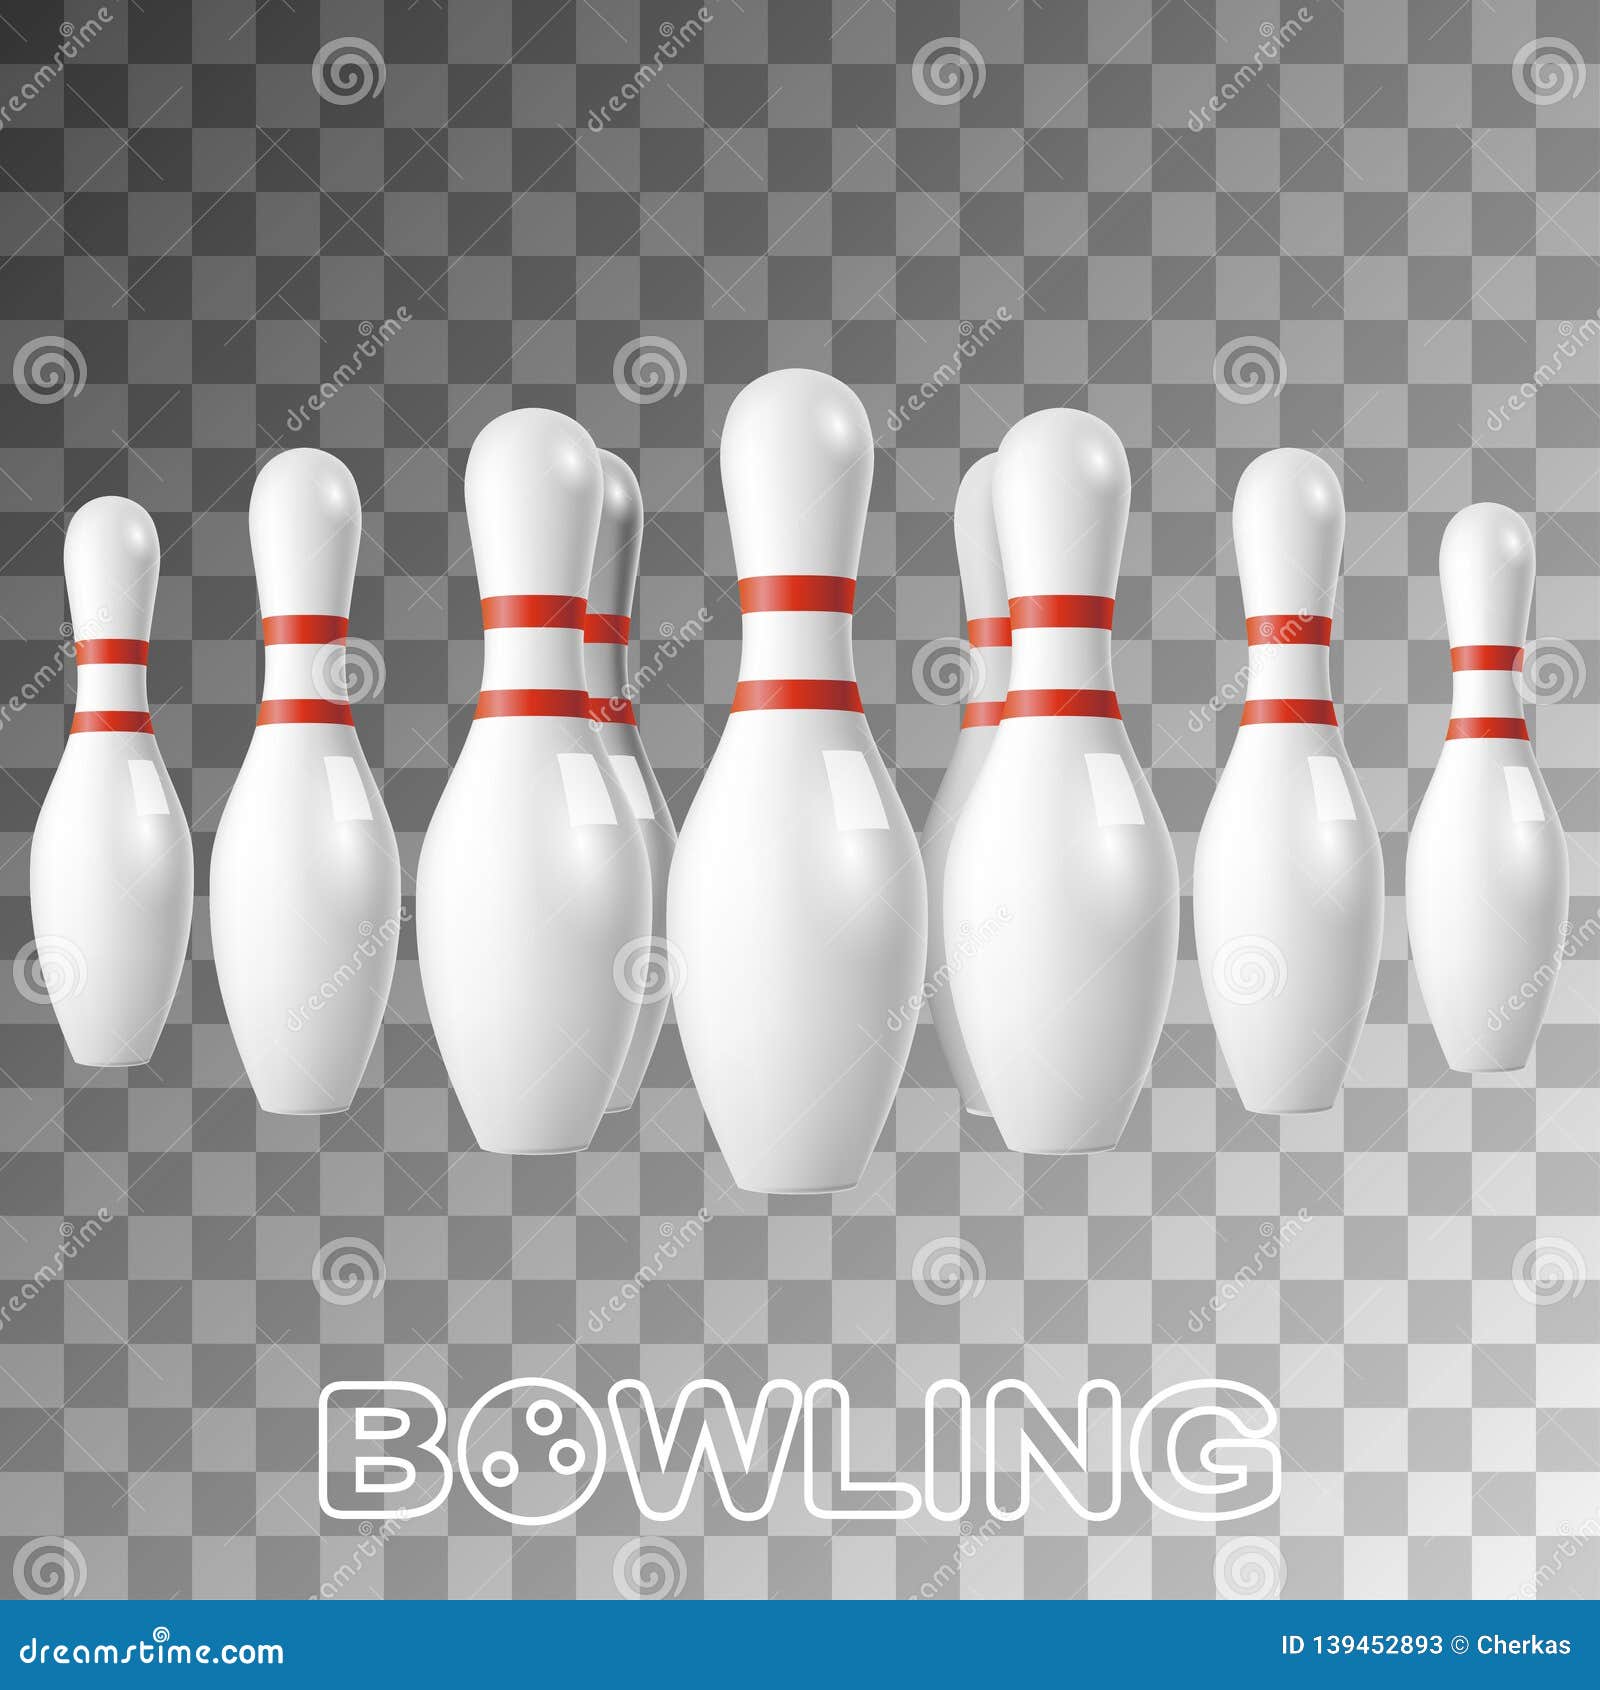 realistic bowling white pins  on transparent